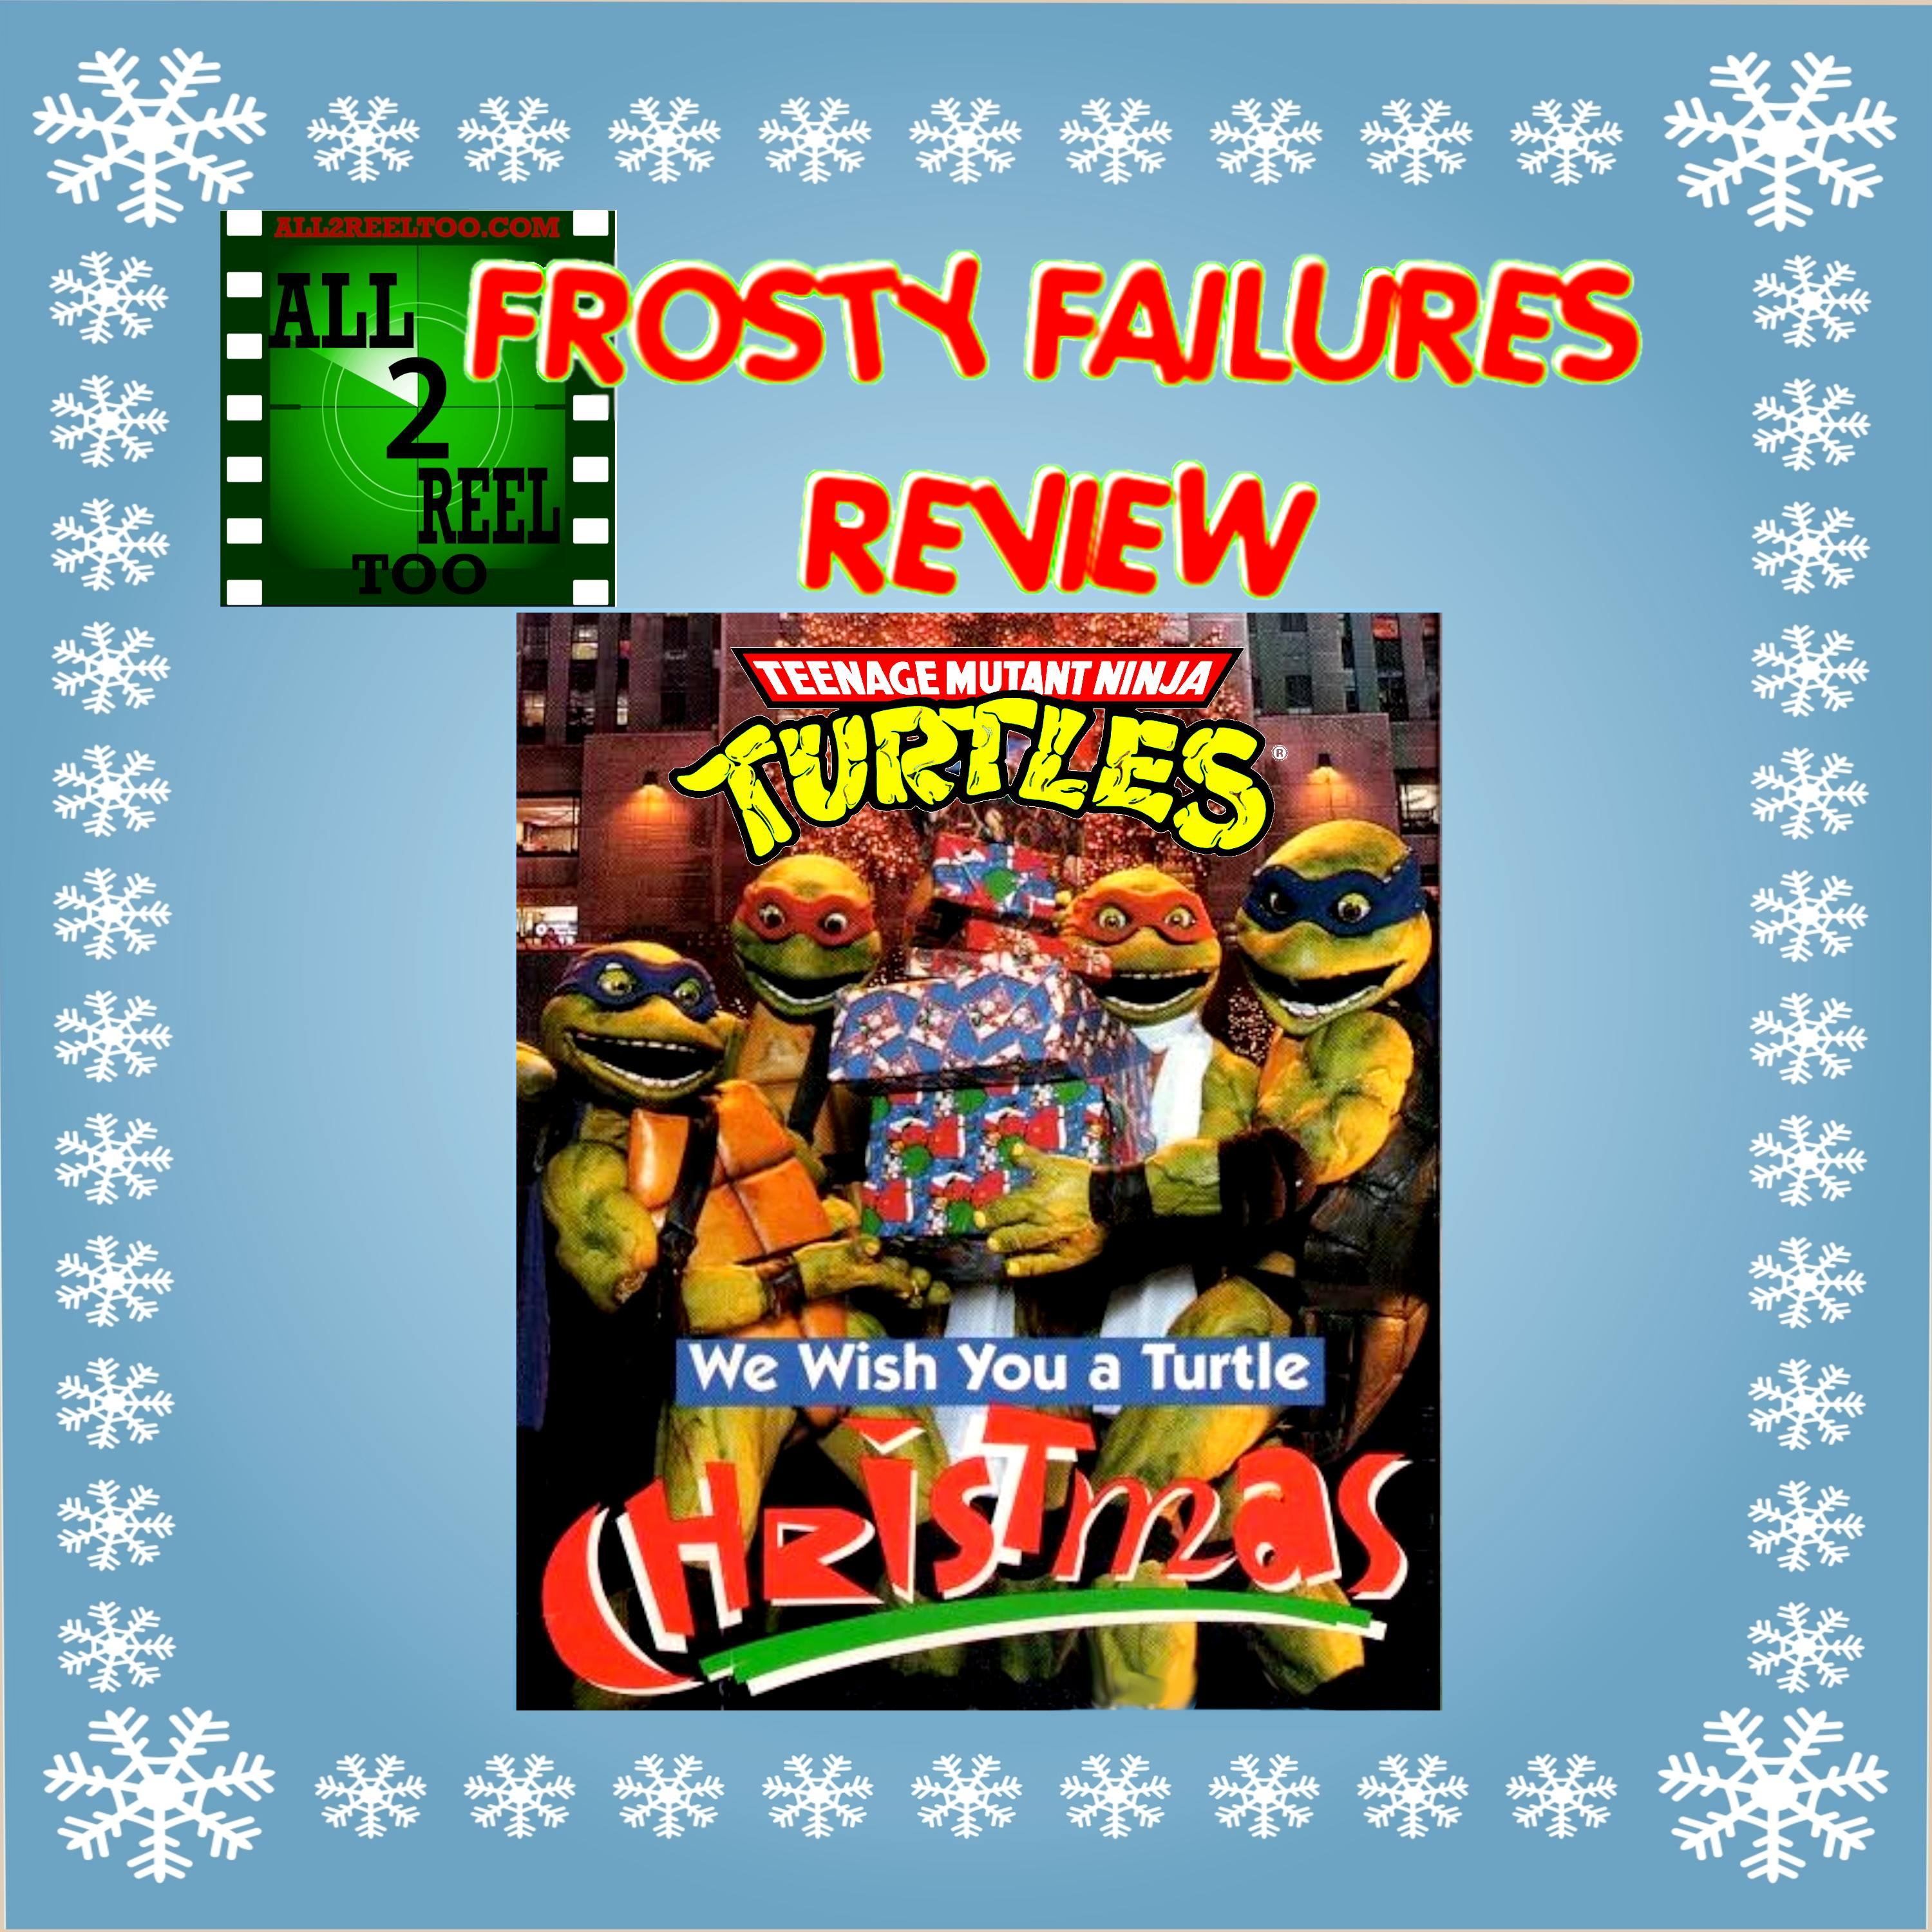 TMNT: We Wish You a Turtle Christmas (1994) - FROSTY FAILURES REVIEW Image